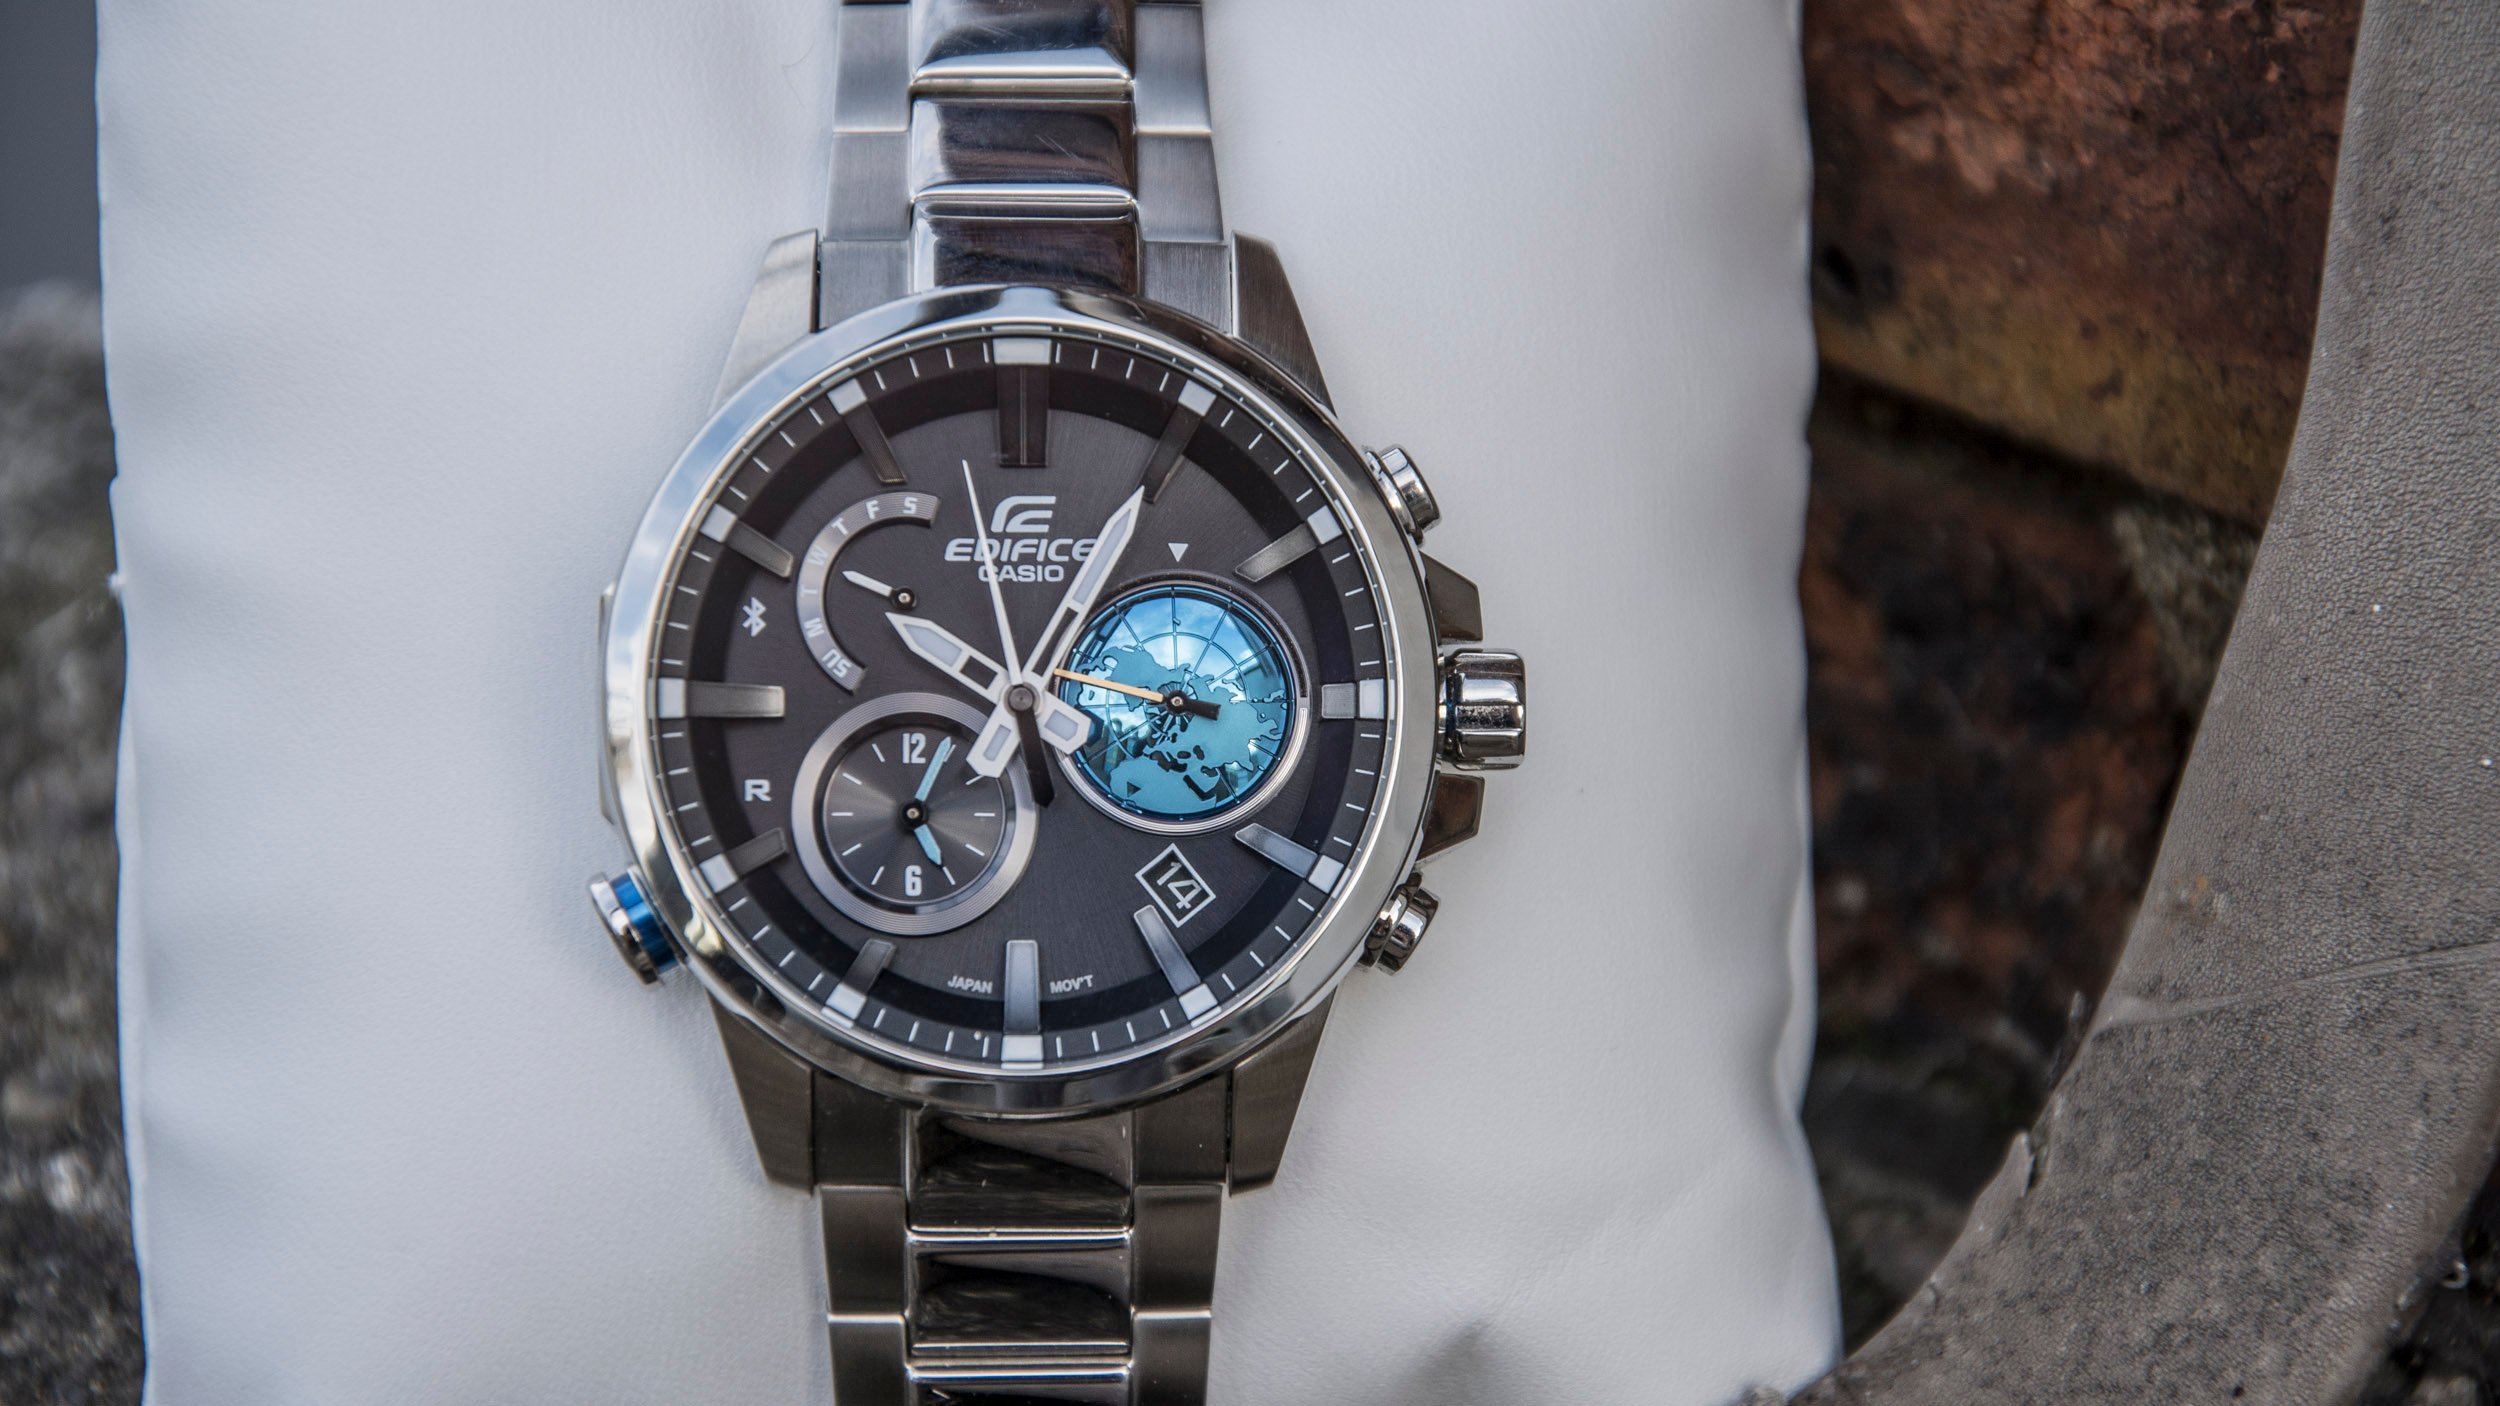 EQB-600 review: The smart-ish watch might have answer to the wearables conundrum